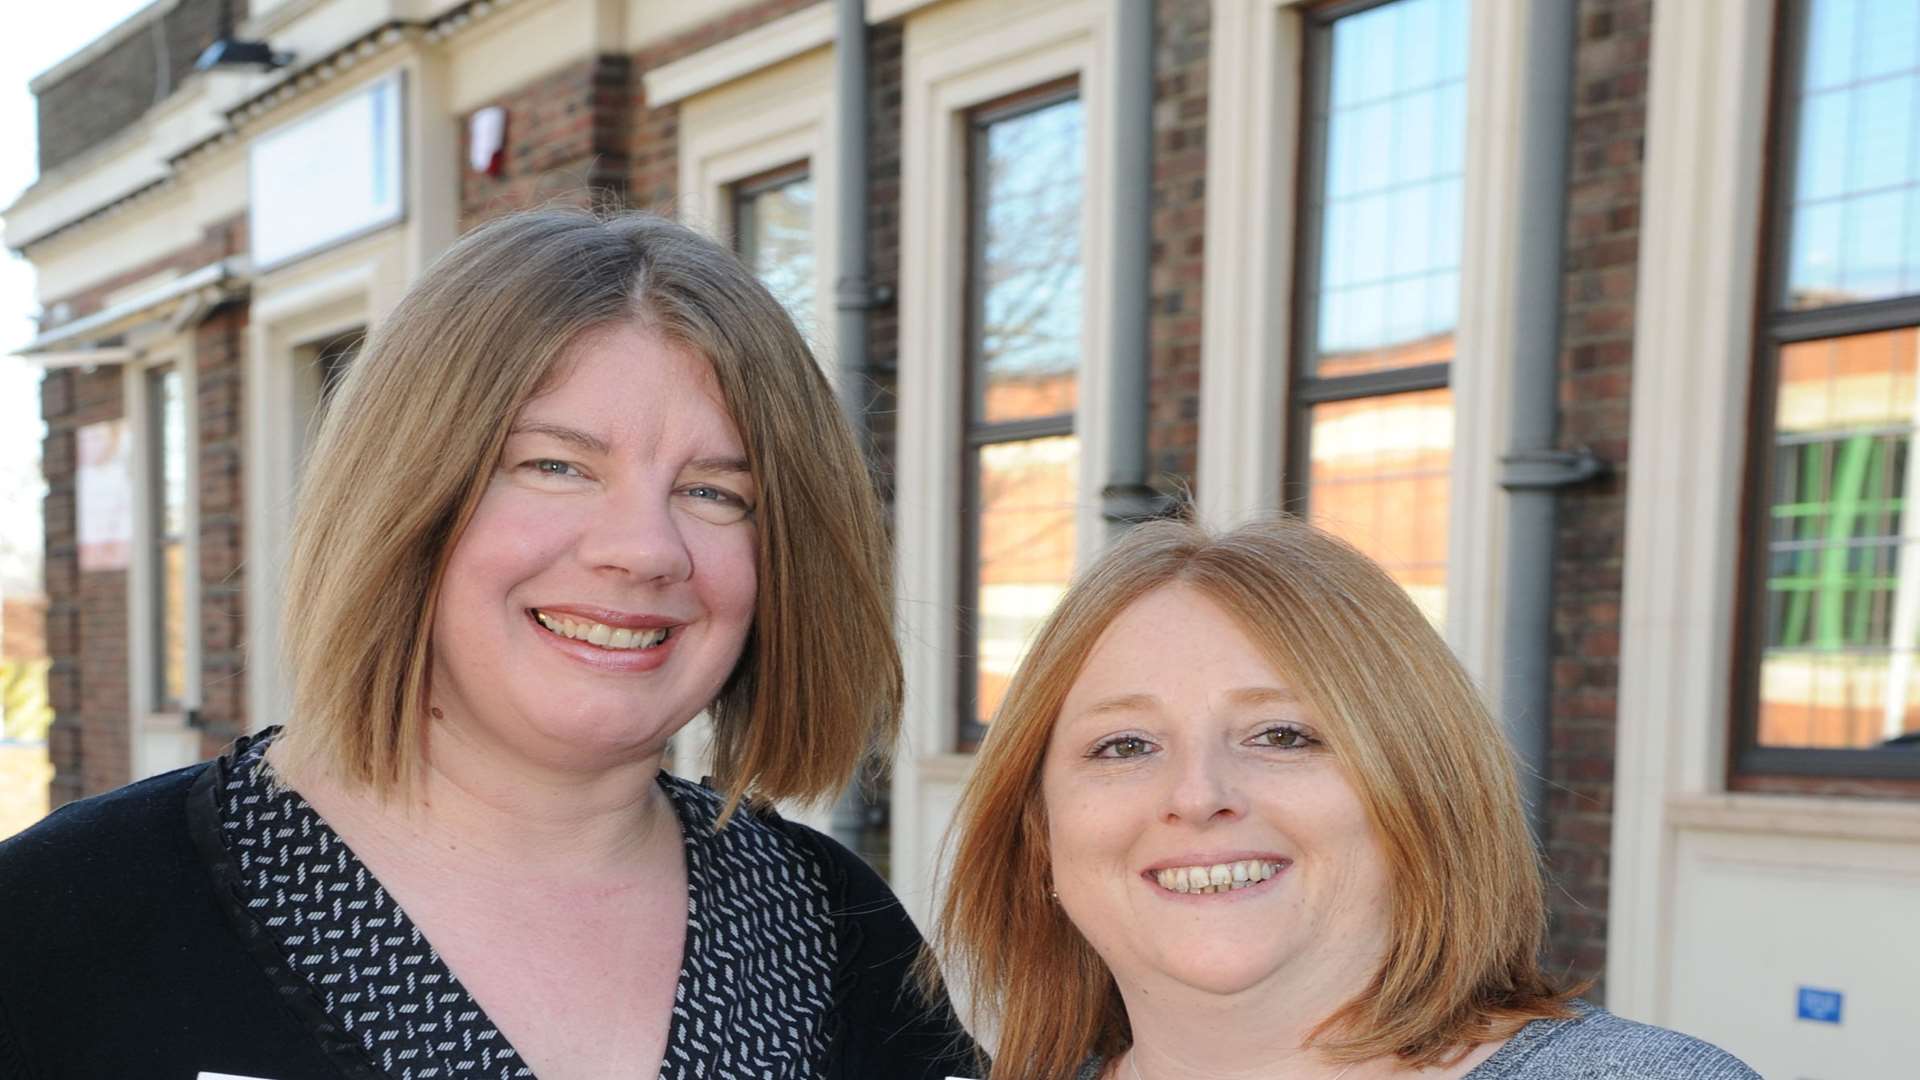 Donna Smith-Emes and Sarah Aldridge say they are disappointed their application was turned down for a second time